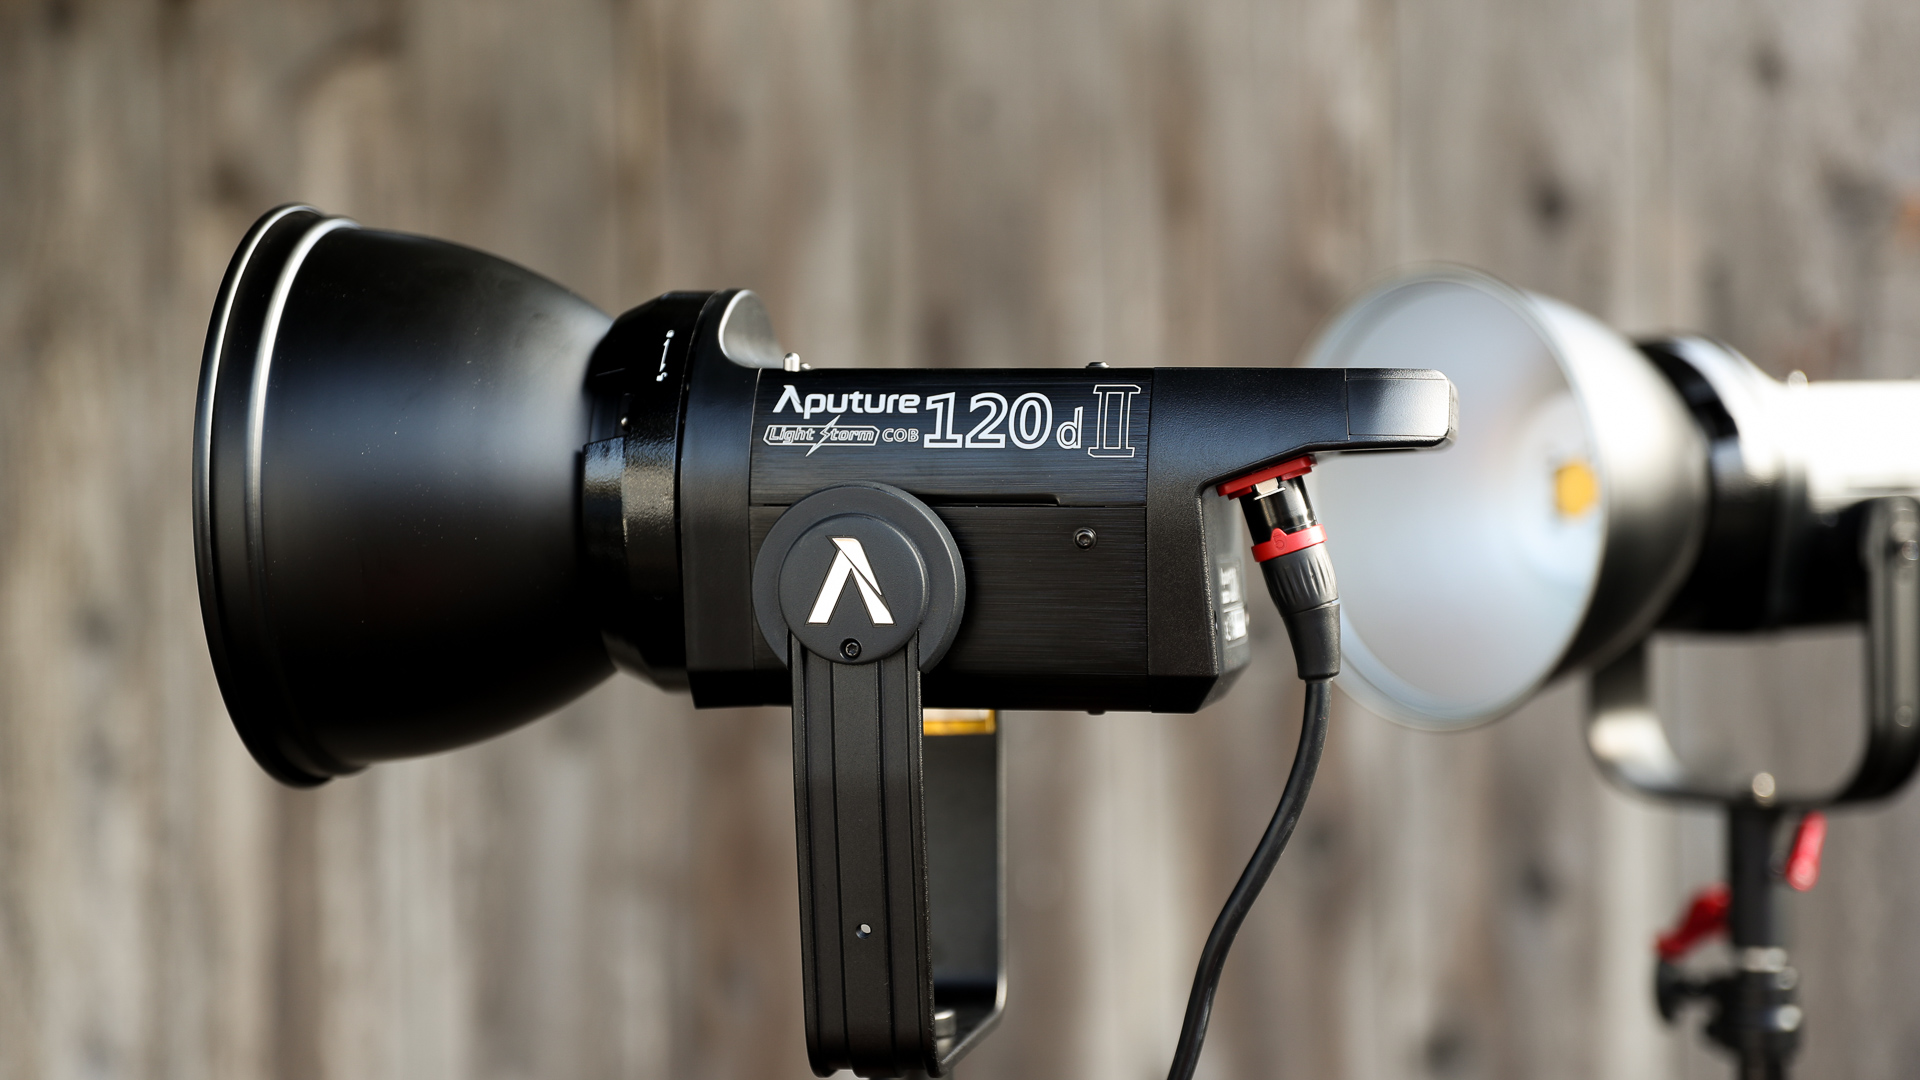 Aputure 120d MK II with Spotlight Mount Review | CineD